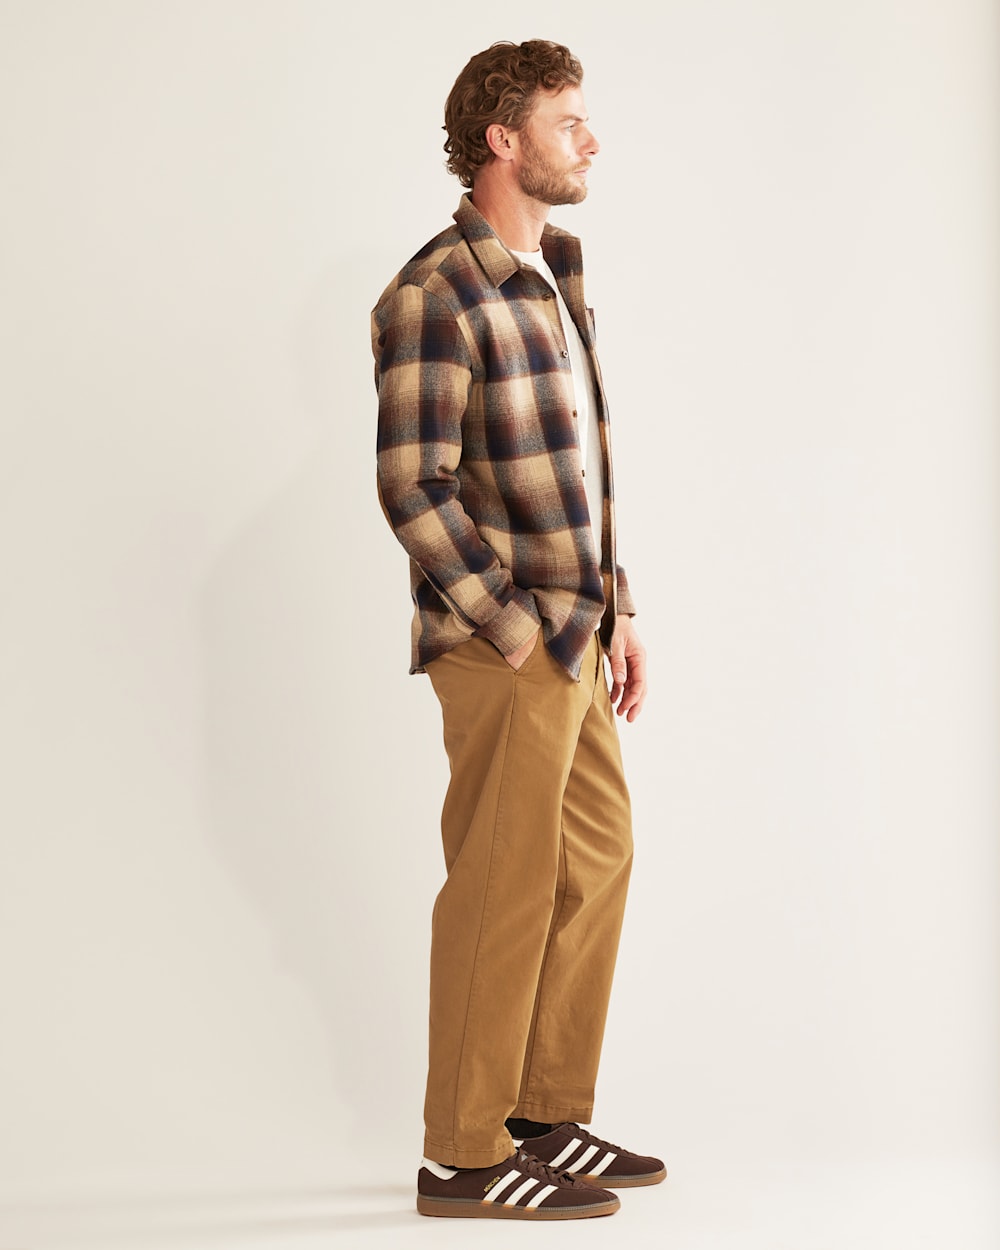 ALTERNATE VIEW OF MEN'S PLAID ELBOW-PATCH TRAIL SHIRT IN BROWN/NAVY OMBRE image number 2